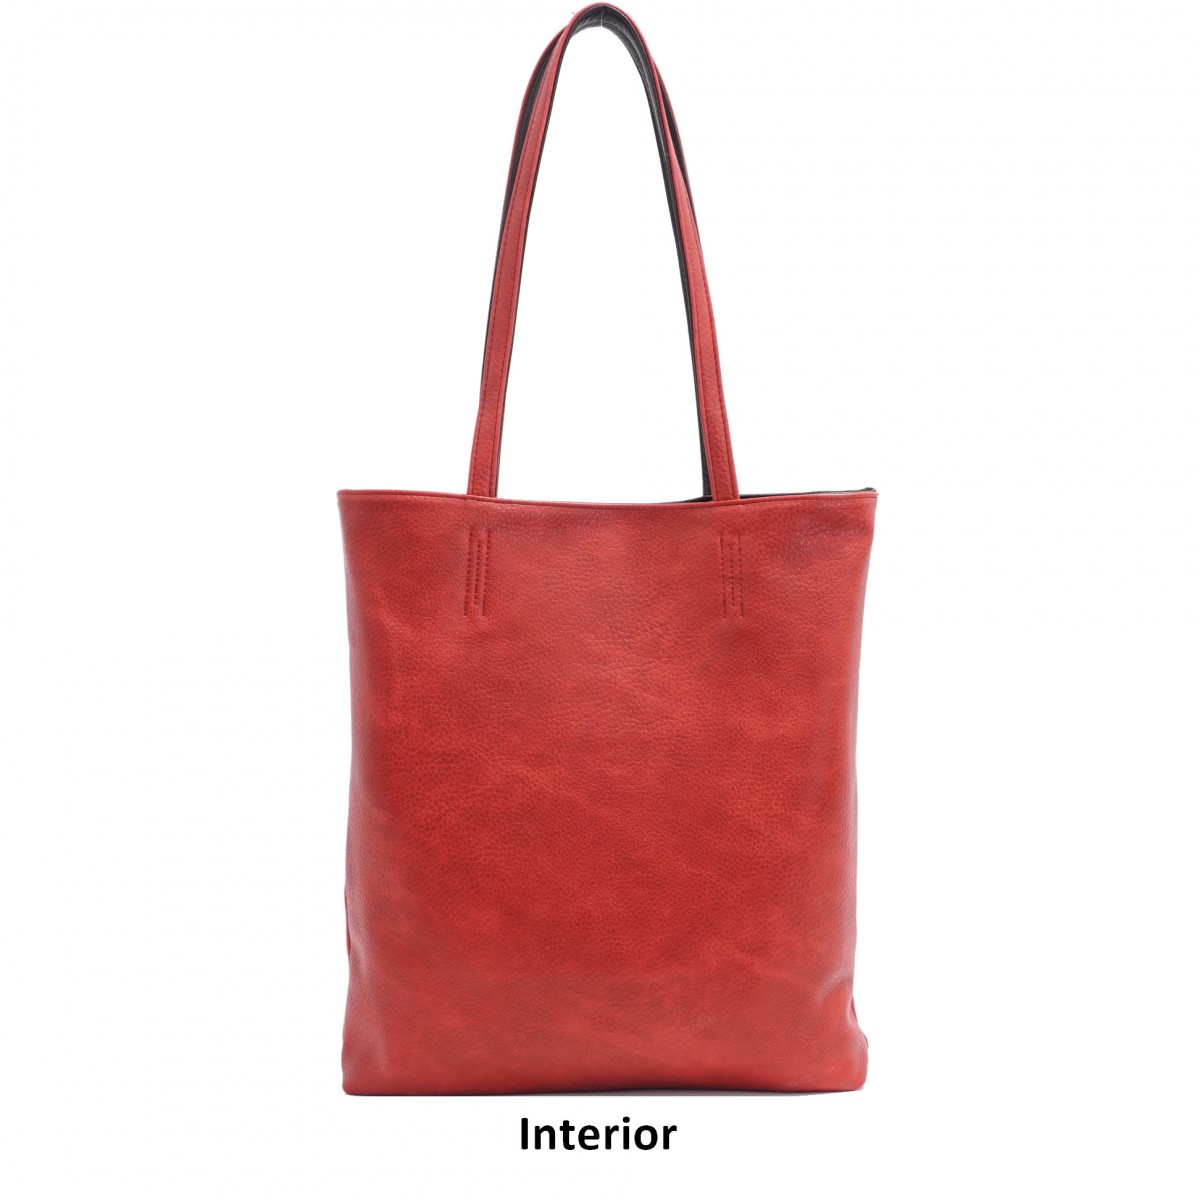 Amia 2-in-1 Reversible Tote - Black / Red 